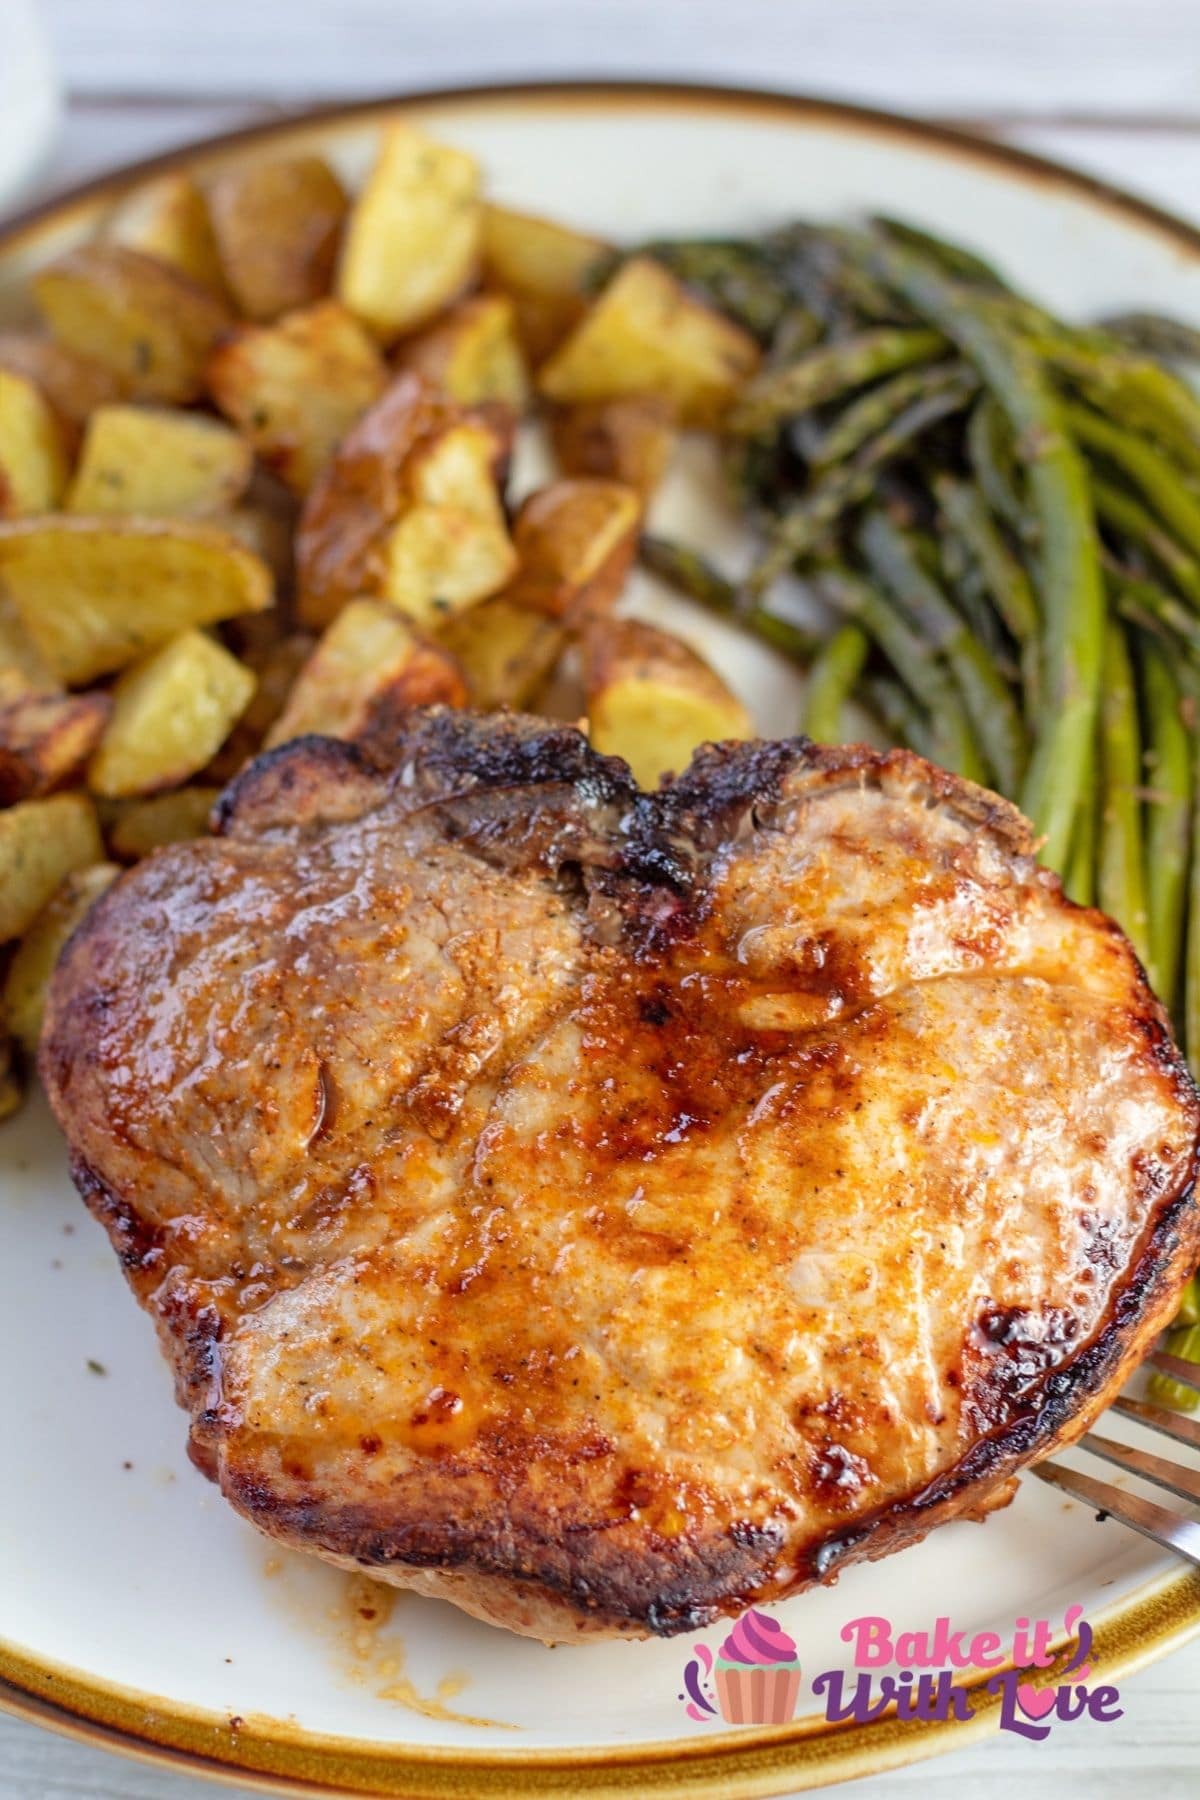 Best air fryer thick cut pork chops recipe showing plated pork chop with asparagus and potatoes.